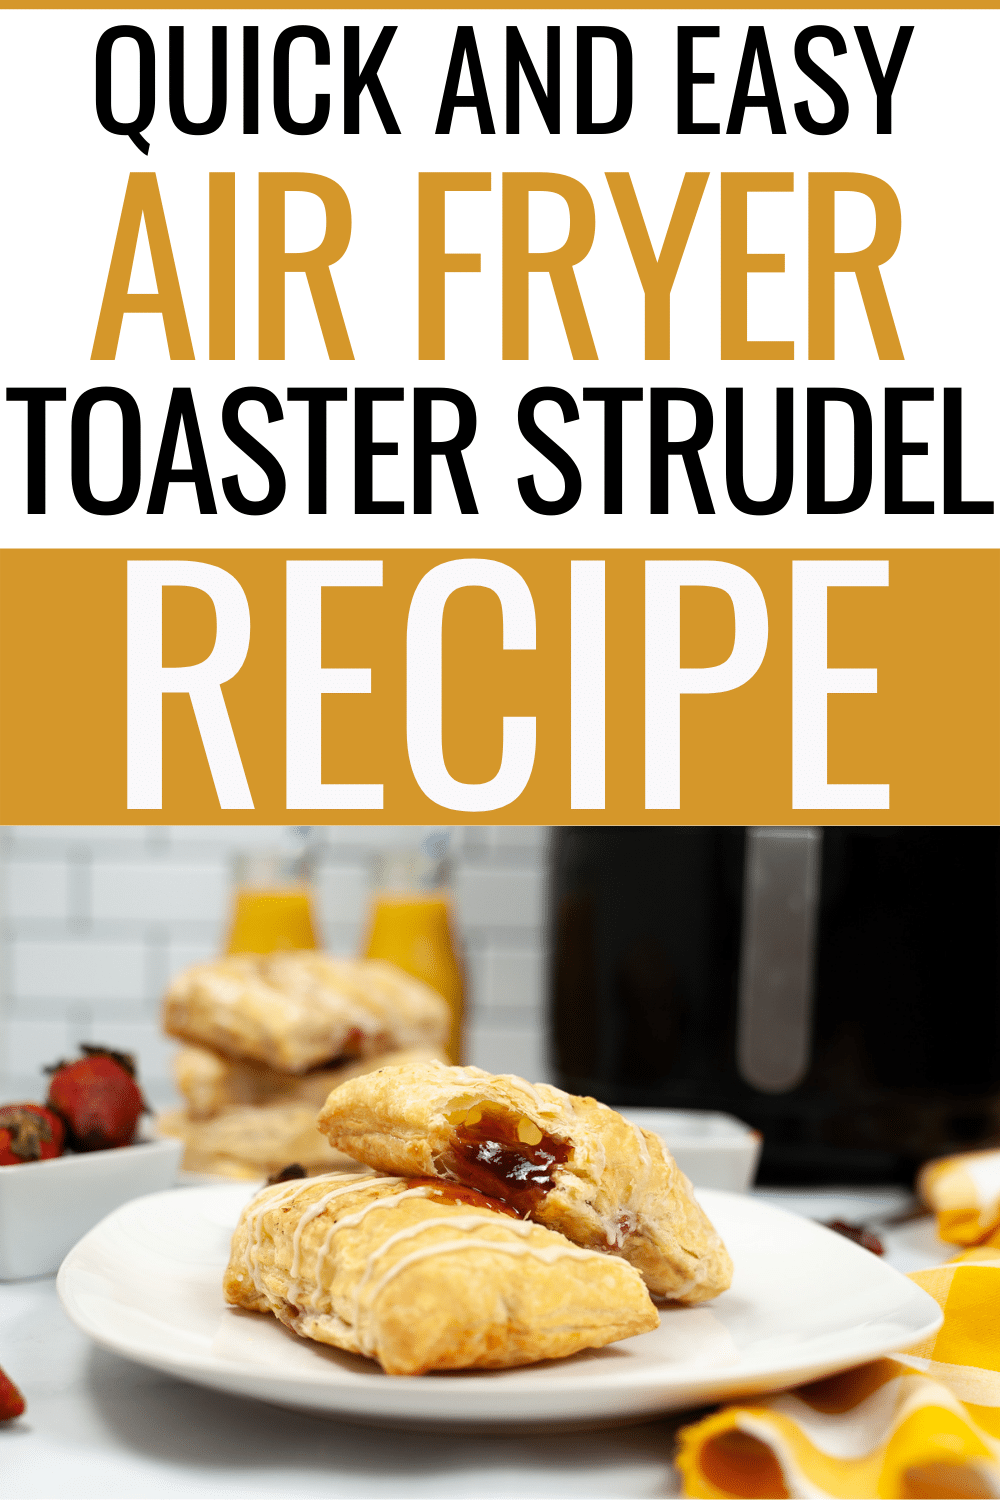 Air Fryer Toaster Strudel is easy to make and turns out perfectly flaky and sweet. This homemade version will be a success with your family. #airfryer #toasterstrudel #homemade #breakfast #recipe via @wondermomwannab